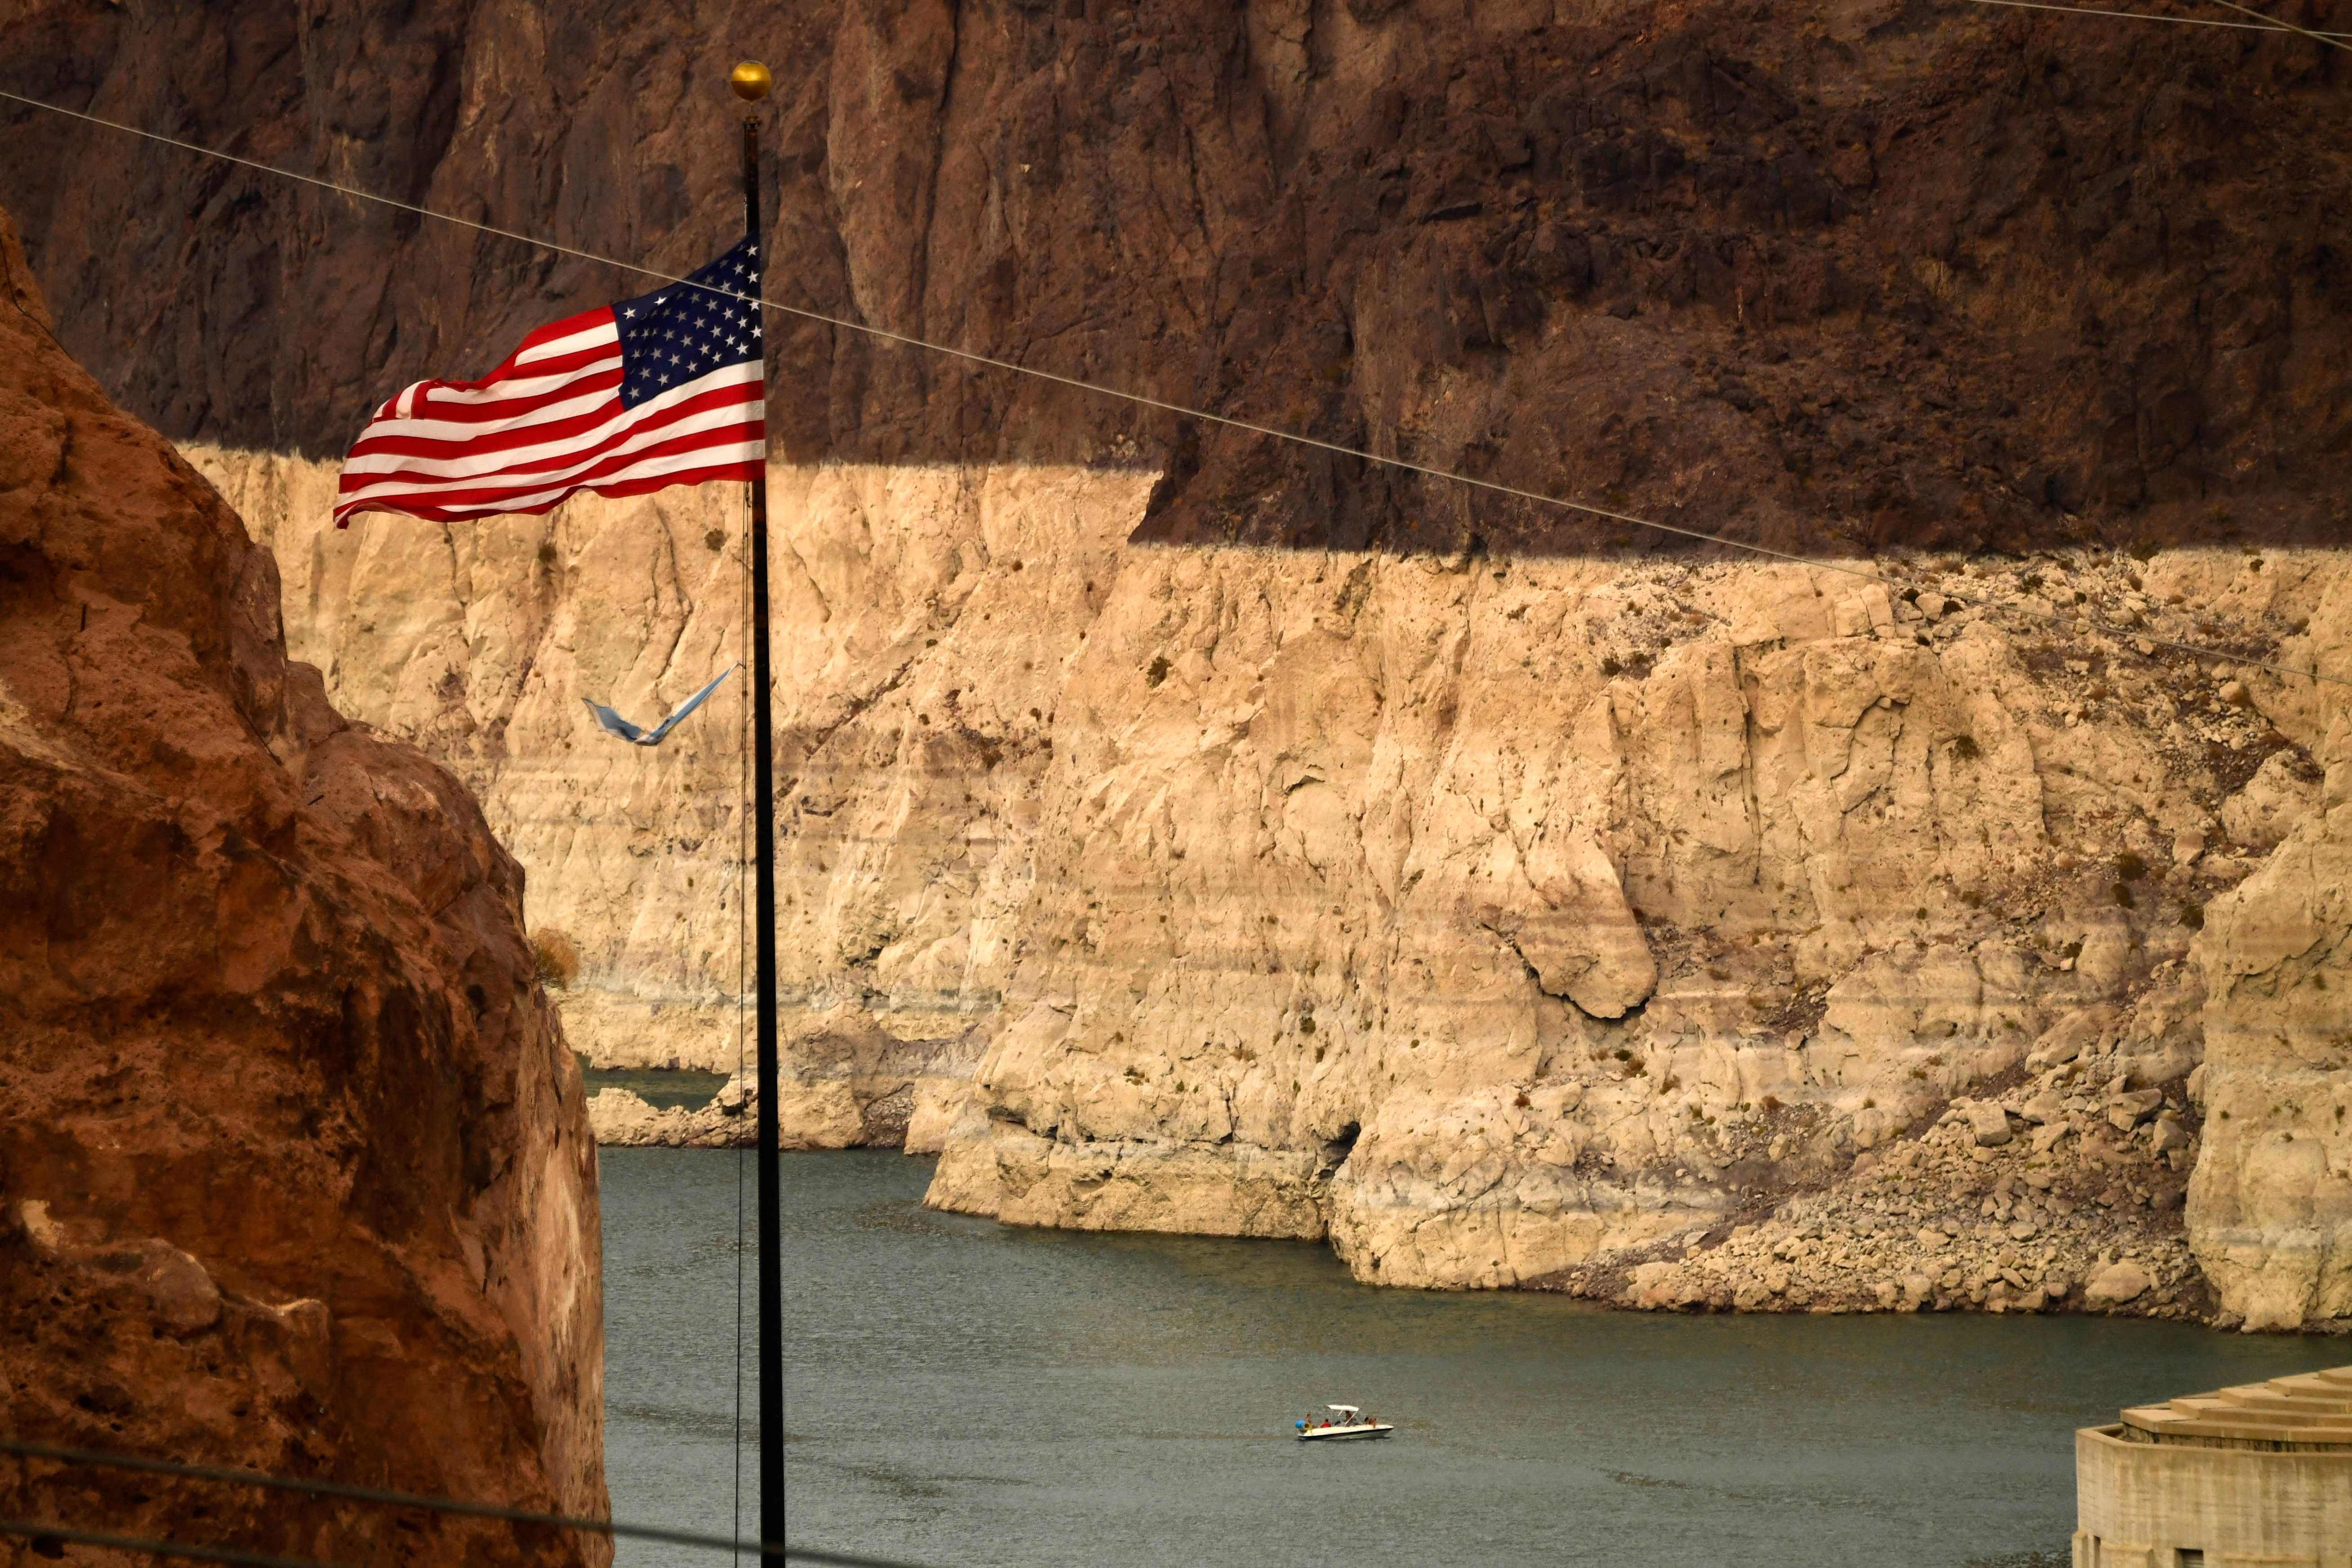 The ‘bathtub ring’ visible due to low water levels at Lake Mead